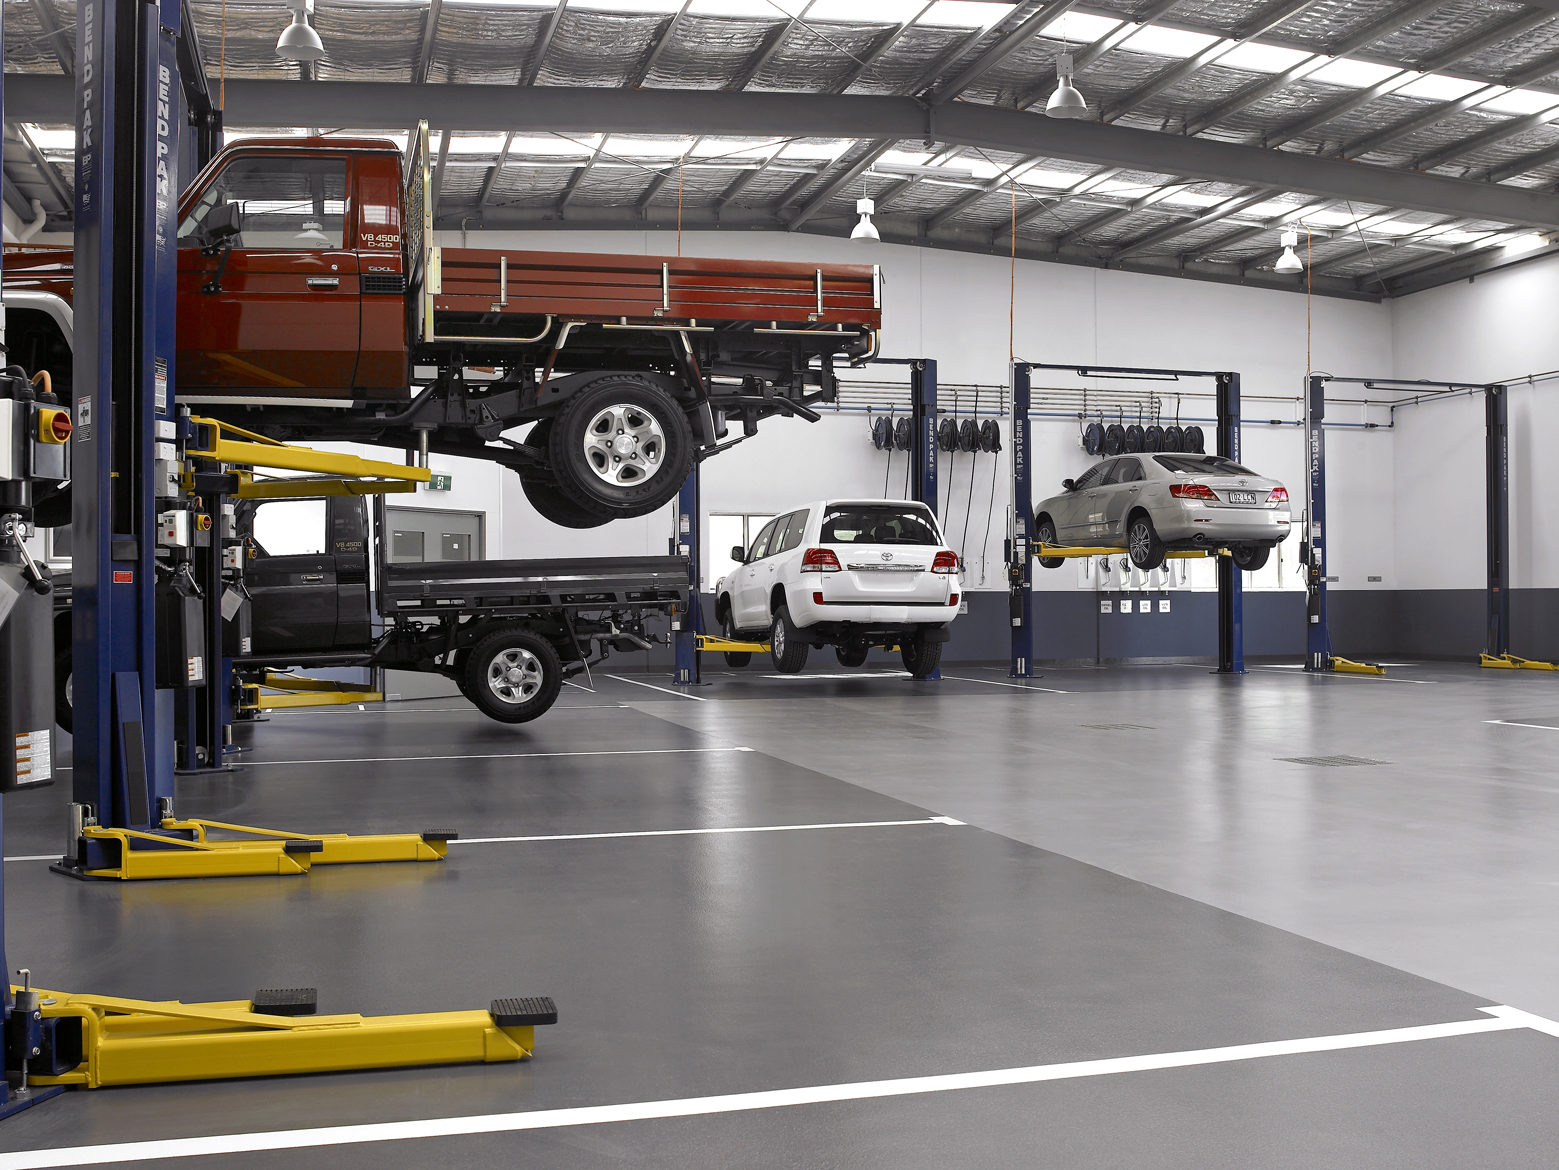 Several BendPak two-post lifts in an open garage space. Trucks, SUVs, and sedans are loaded on the car lifts.